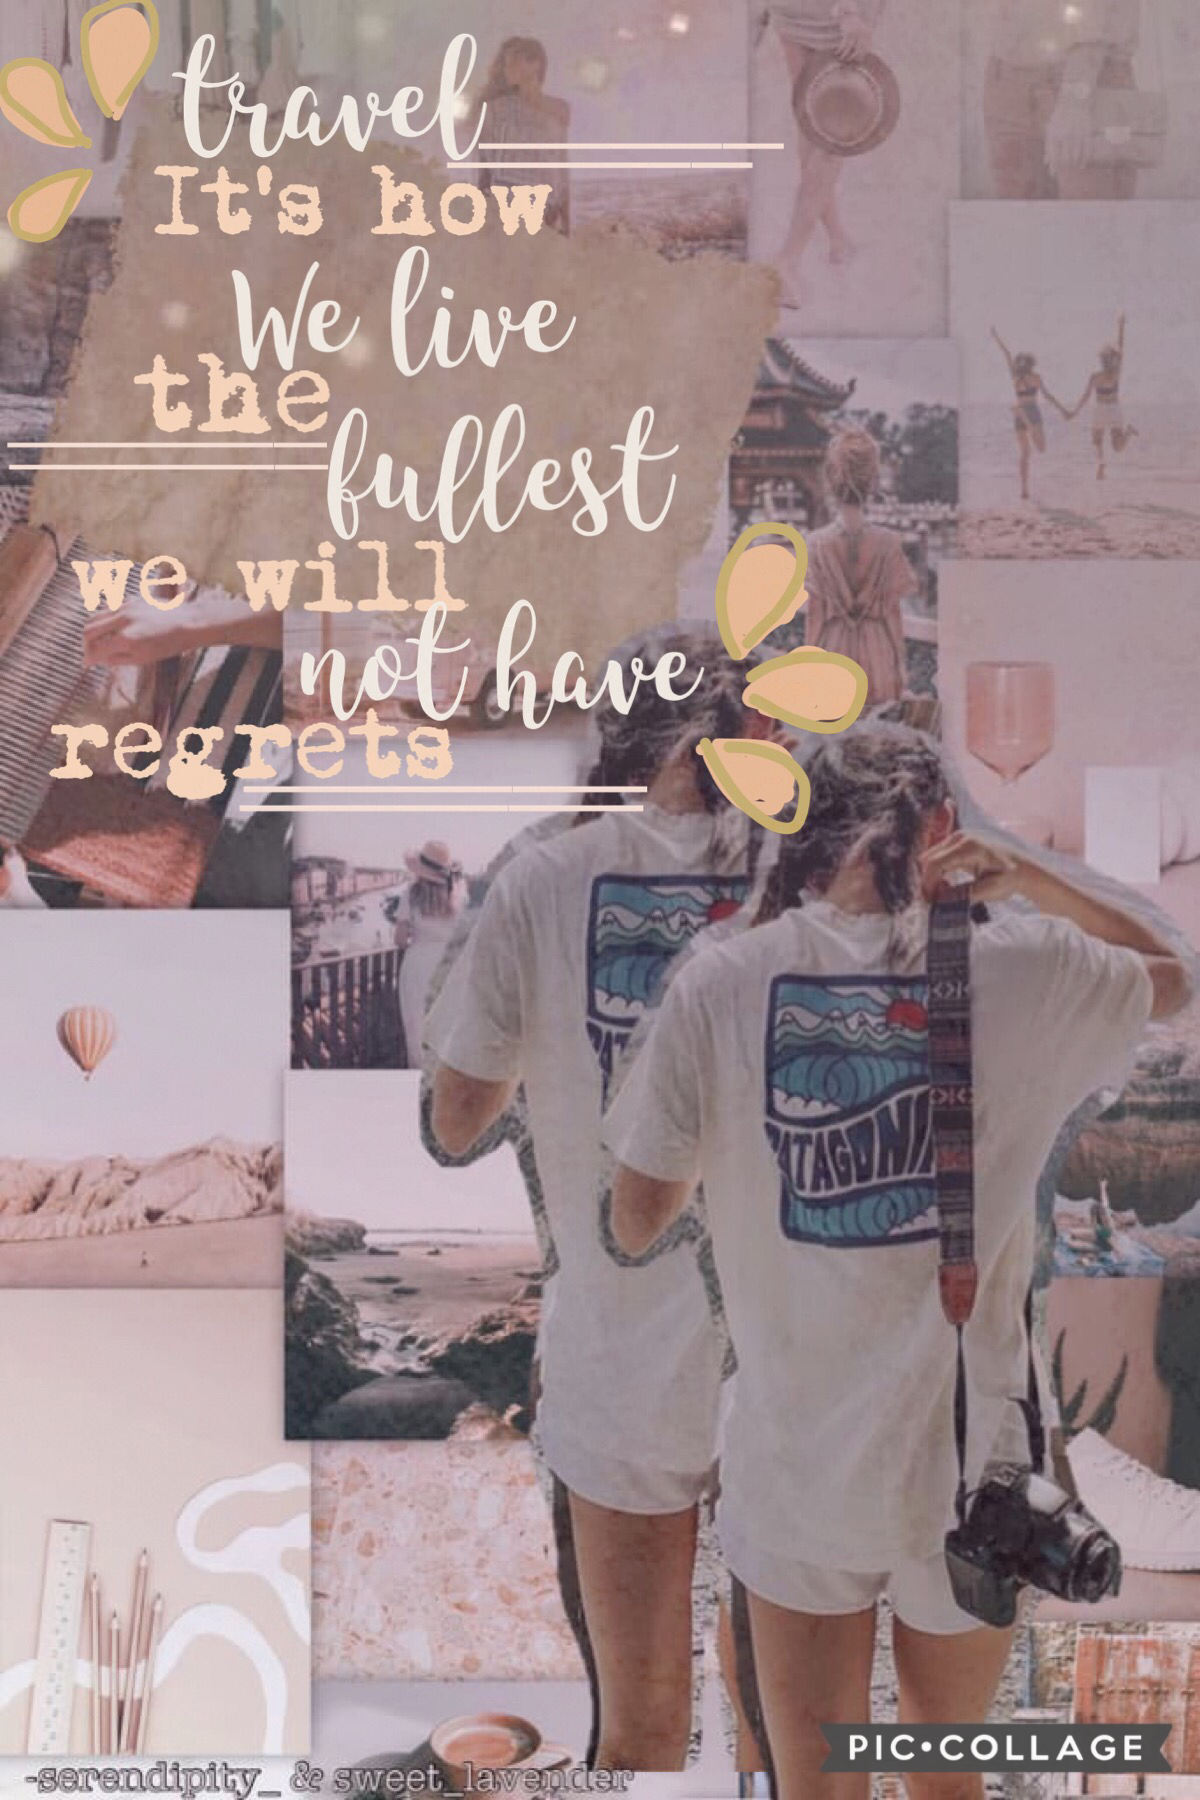 🦋6/10/21 🦋tap
Collab with serendipity
They did the stunning bg and I did the text!
Please follow them her!💕🤩
Have a good day/night!!
No qotd for today:)
